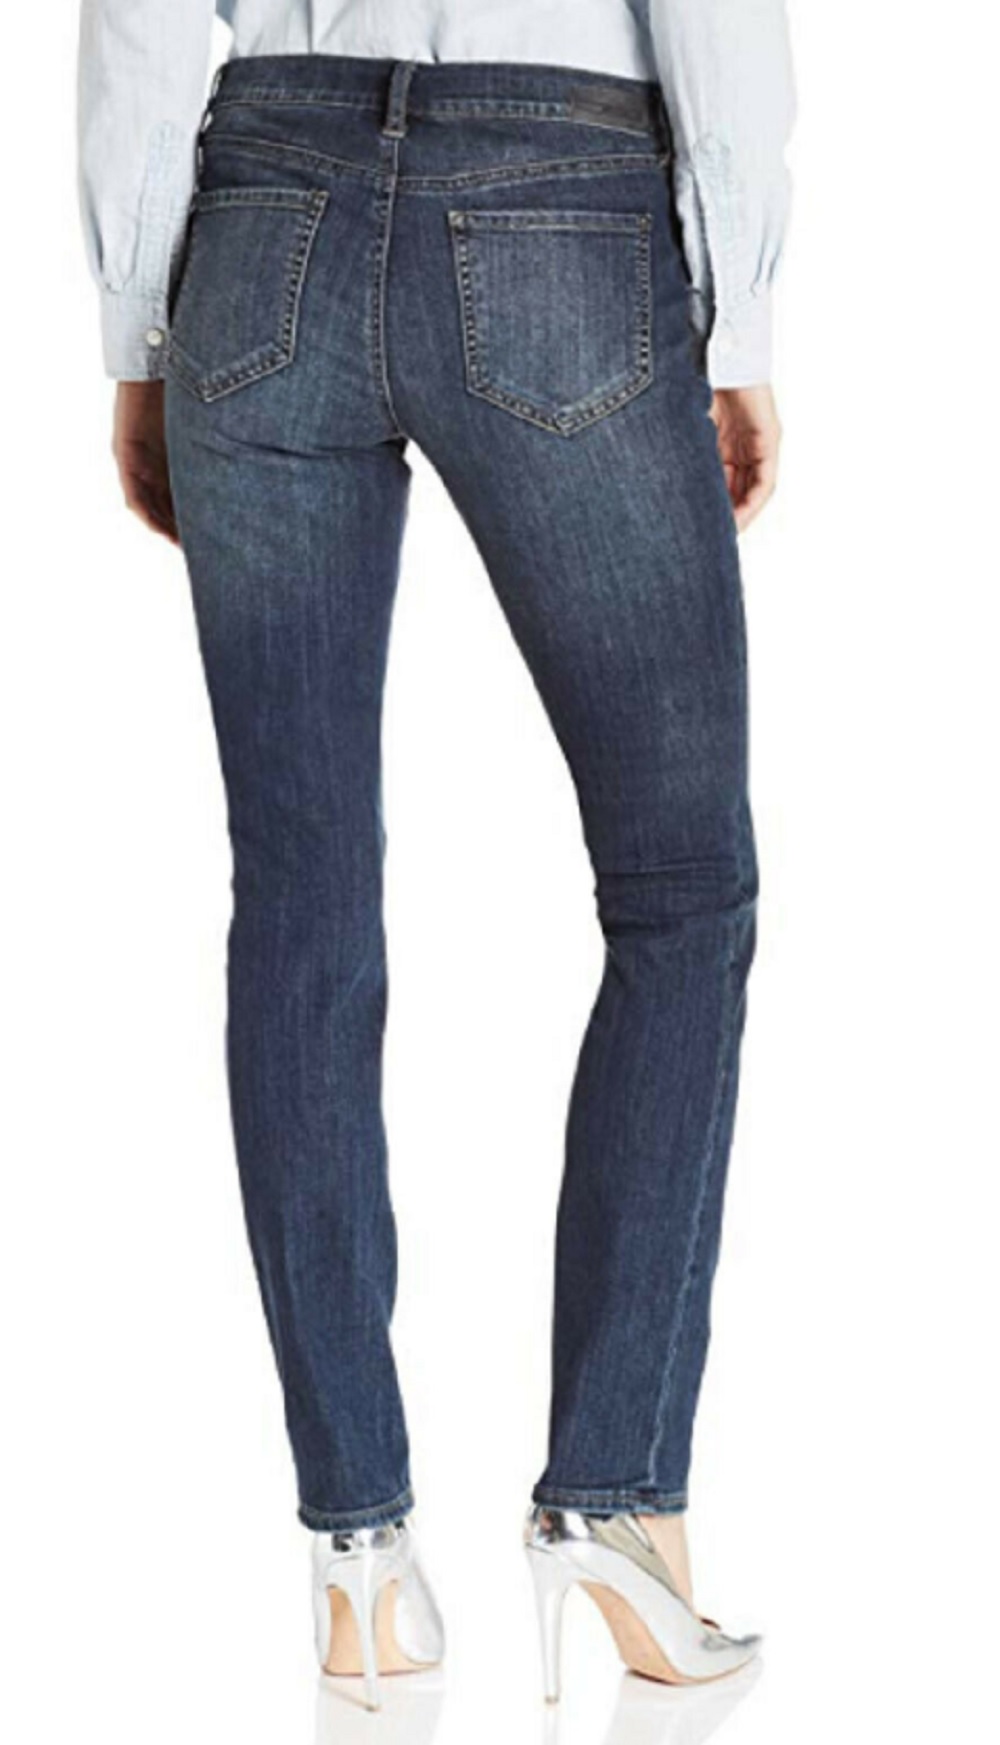 DKNY Jeans Ladies' Soho Classic Skinny Jeans Chelsea Wash (2x32) - image 2 of 2